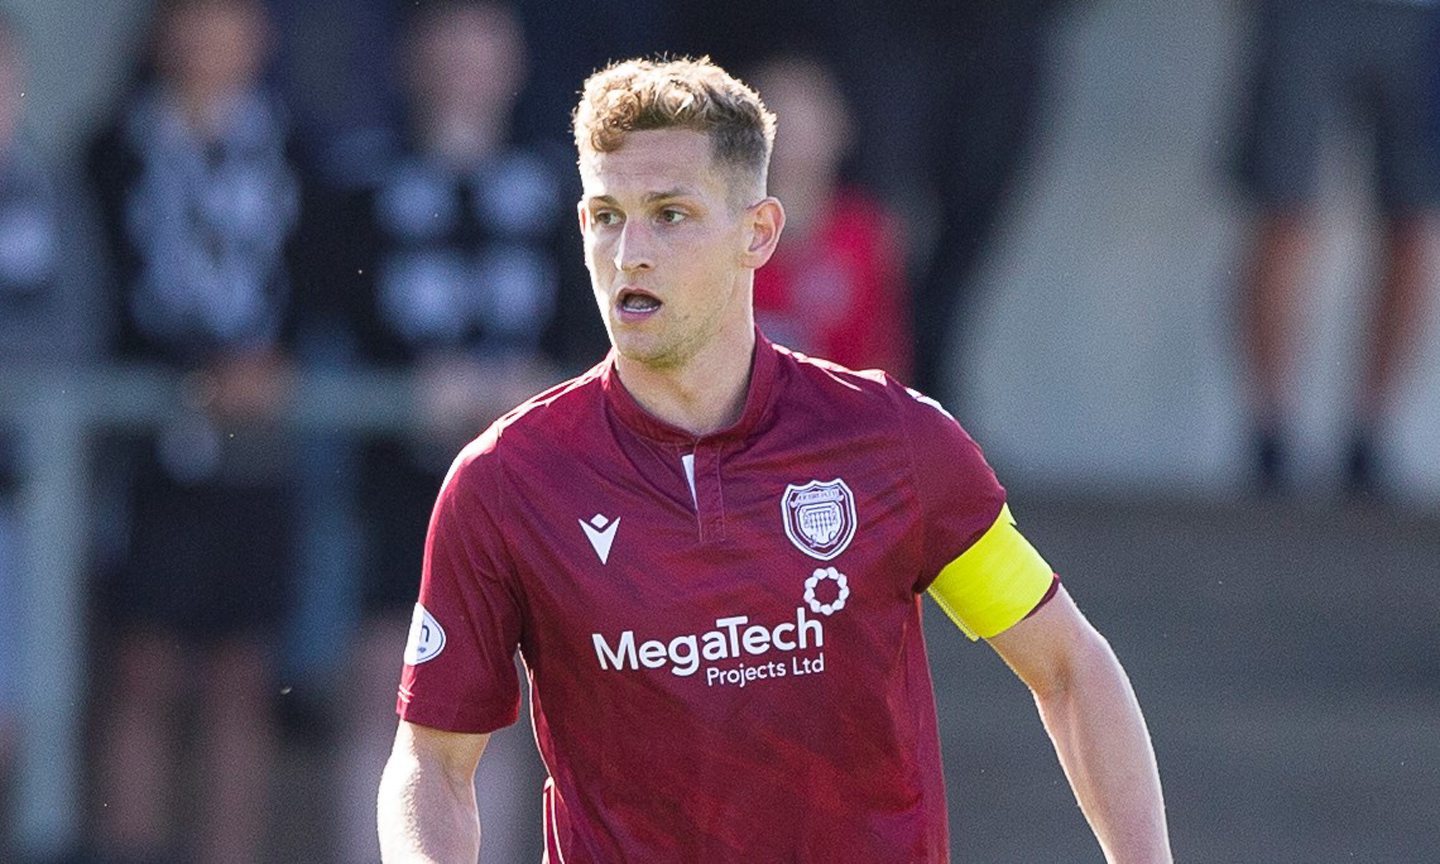 Arbroath skipper Tam O'Brien has missed much of the season due to injury and suspension. Image: SNS